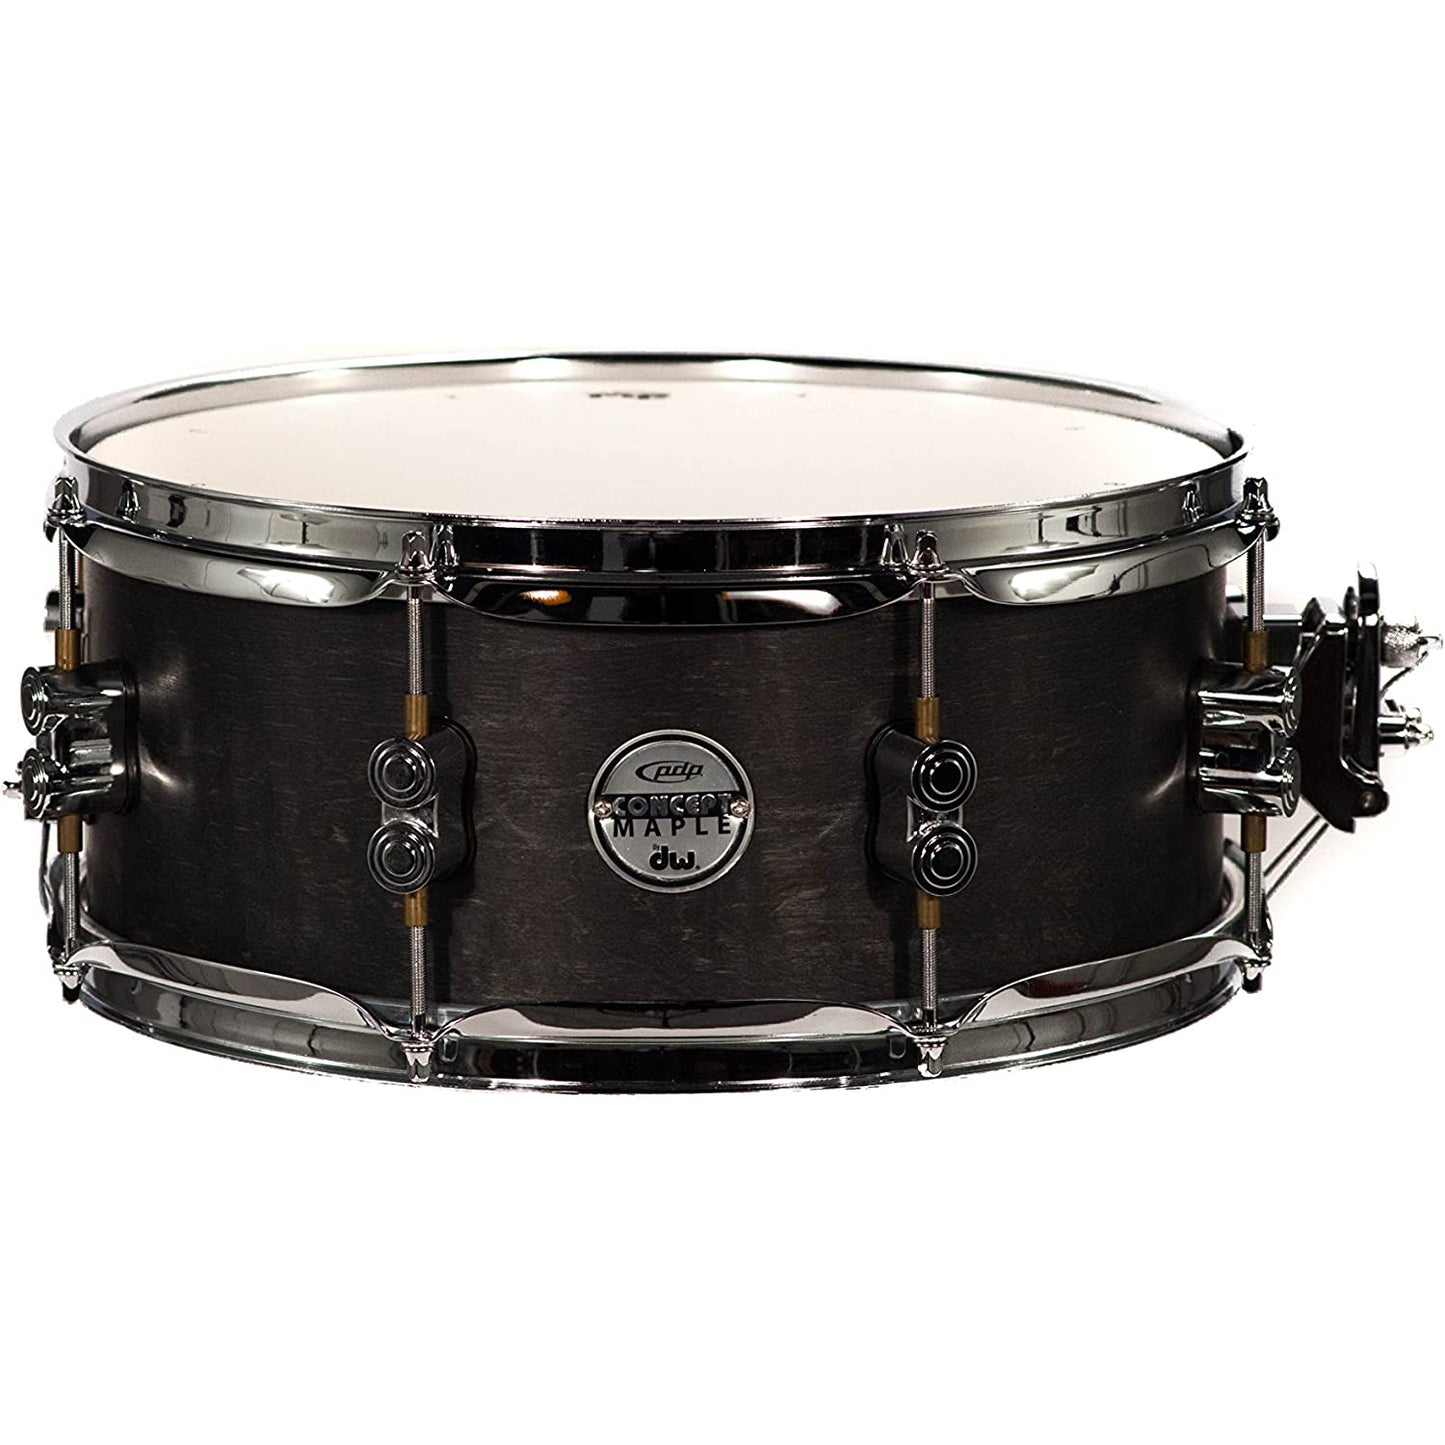 Pacific Drums & Percussion Black Wax Maple Snare Drum 5.5x13